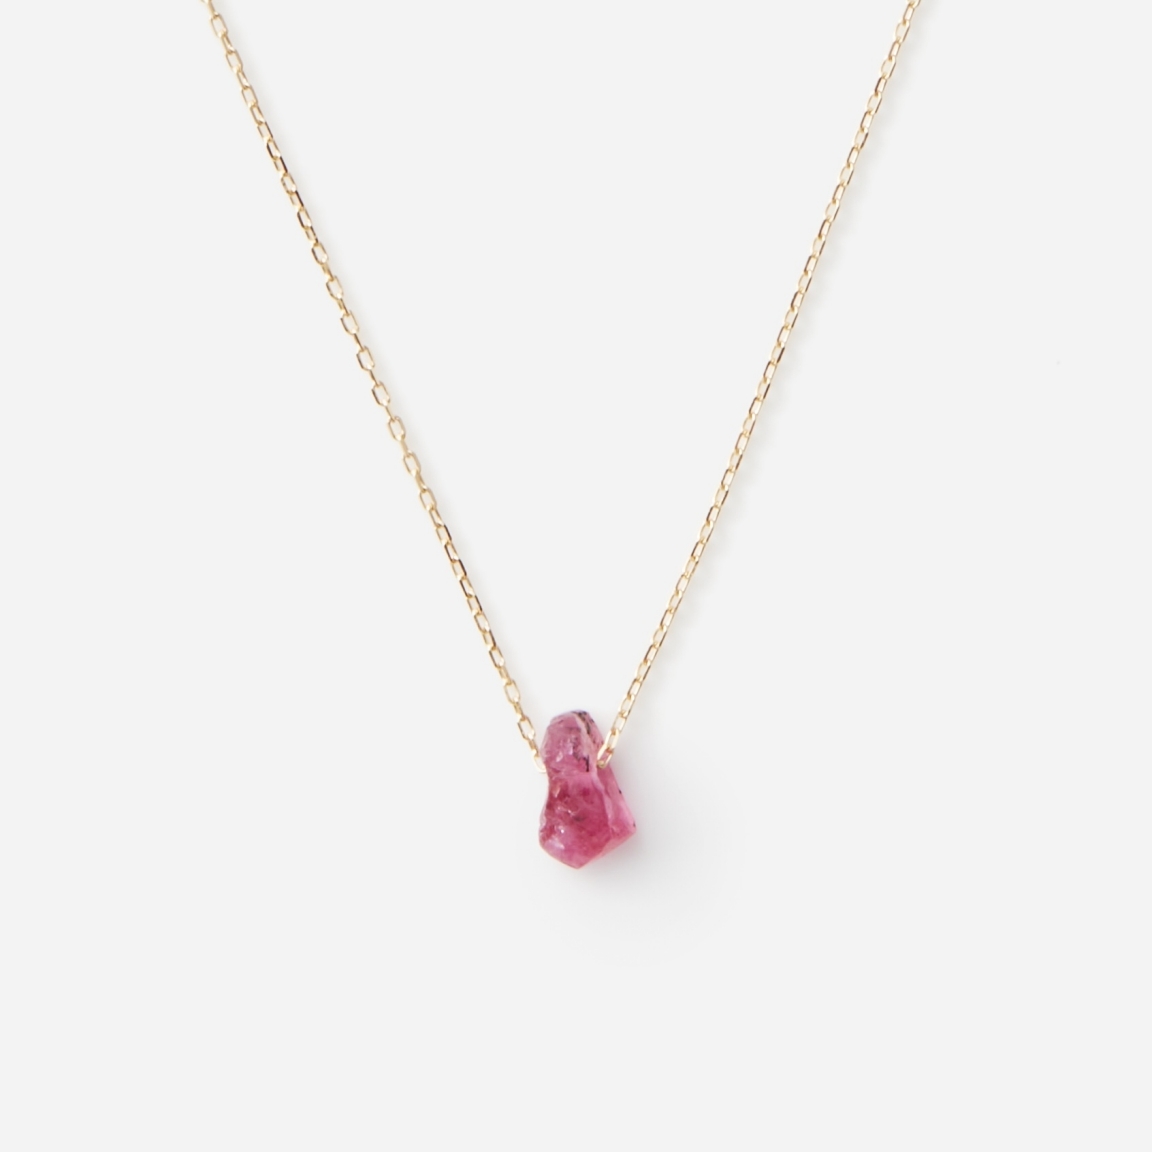 bororo（ボロロ）Ruby Top Necklace | ルビー ネックレス - CULET 公式